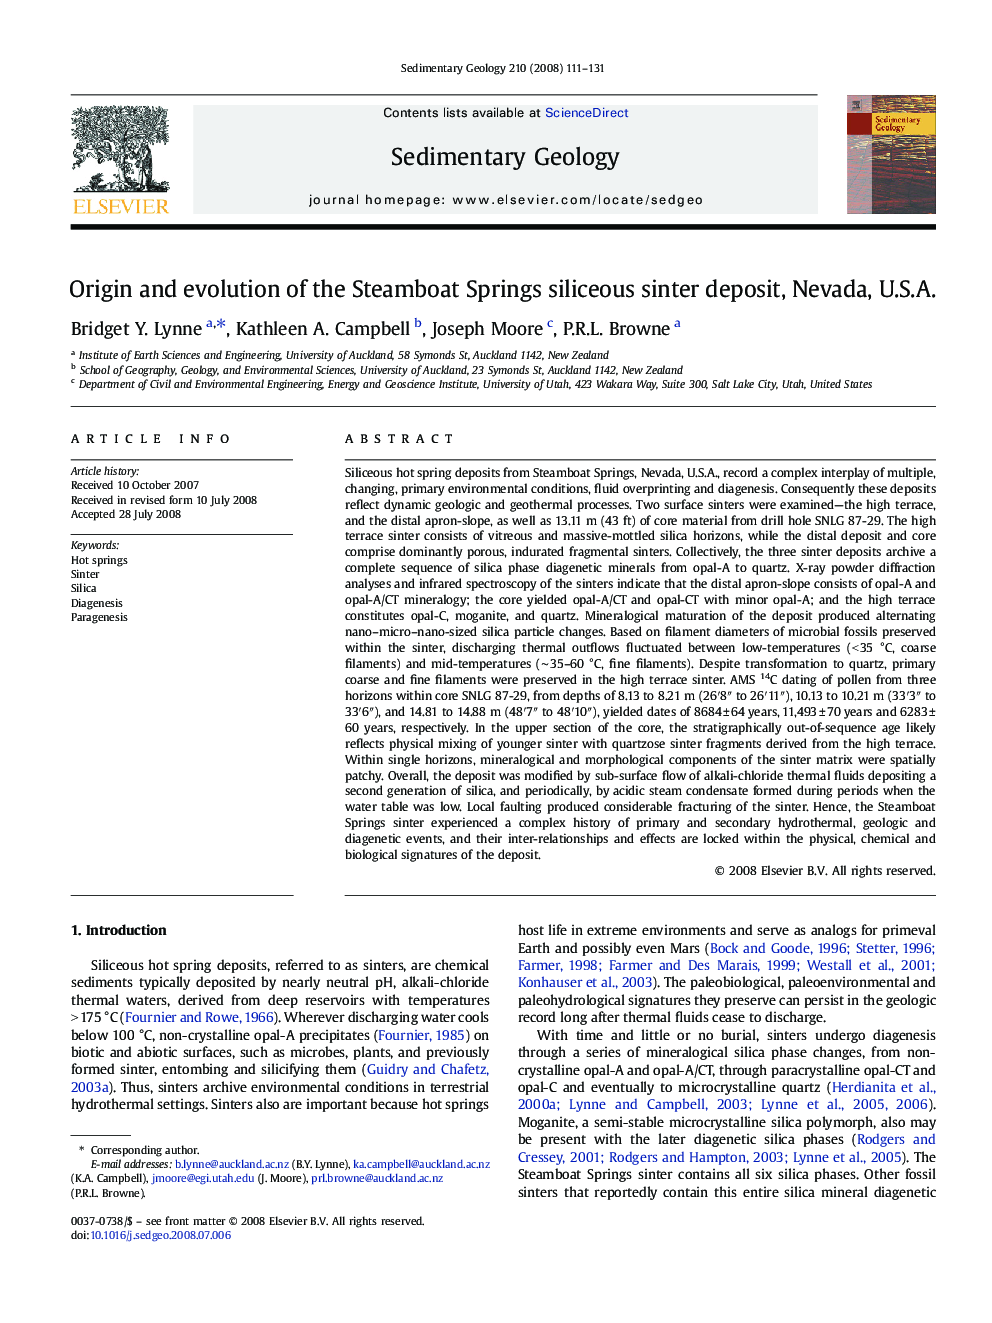 Origin and evolution of the Steamboat Springs siliceous sinter deposit, Nevada, U.S.A.